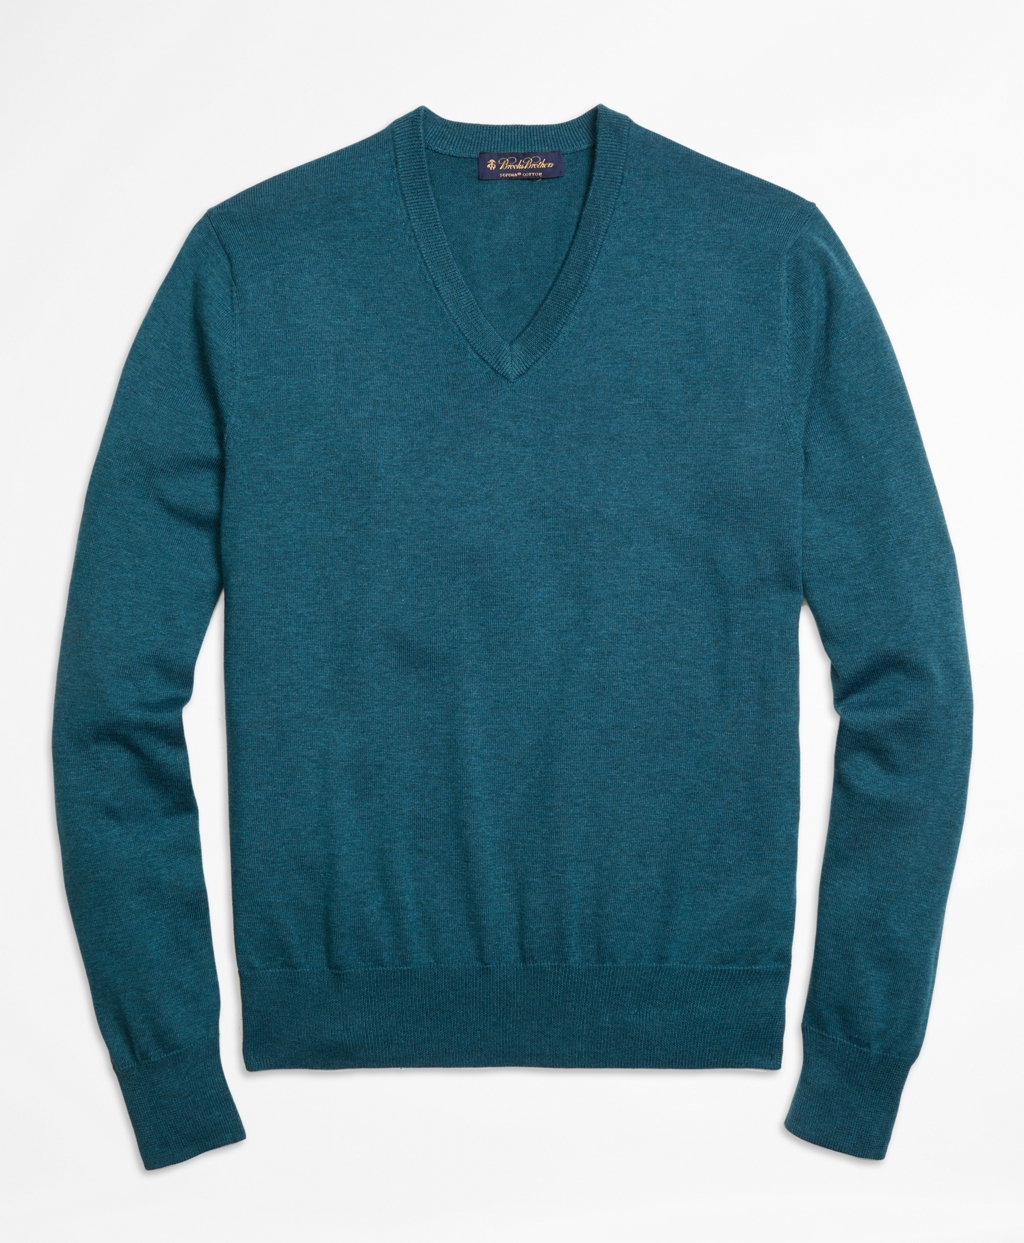 Lyst - Brooks Brothers Supima® Cotton V-neck Sweater in Blue for Men